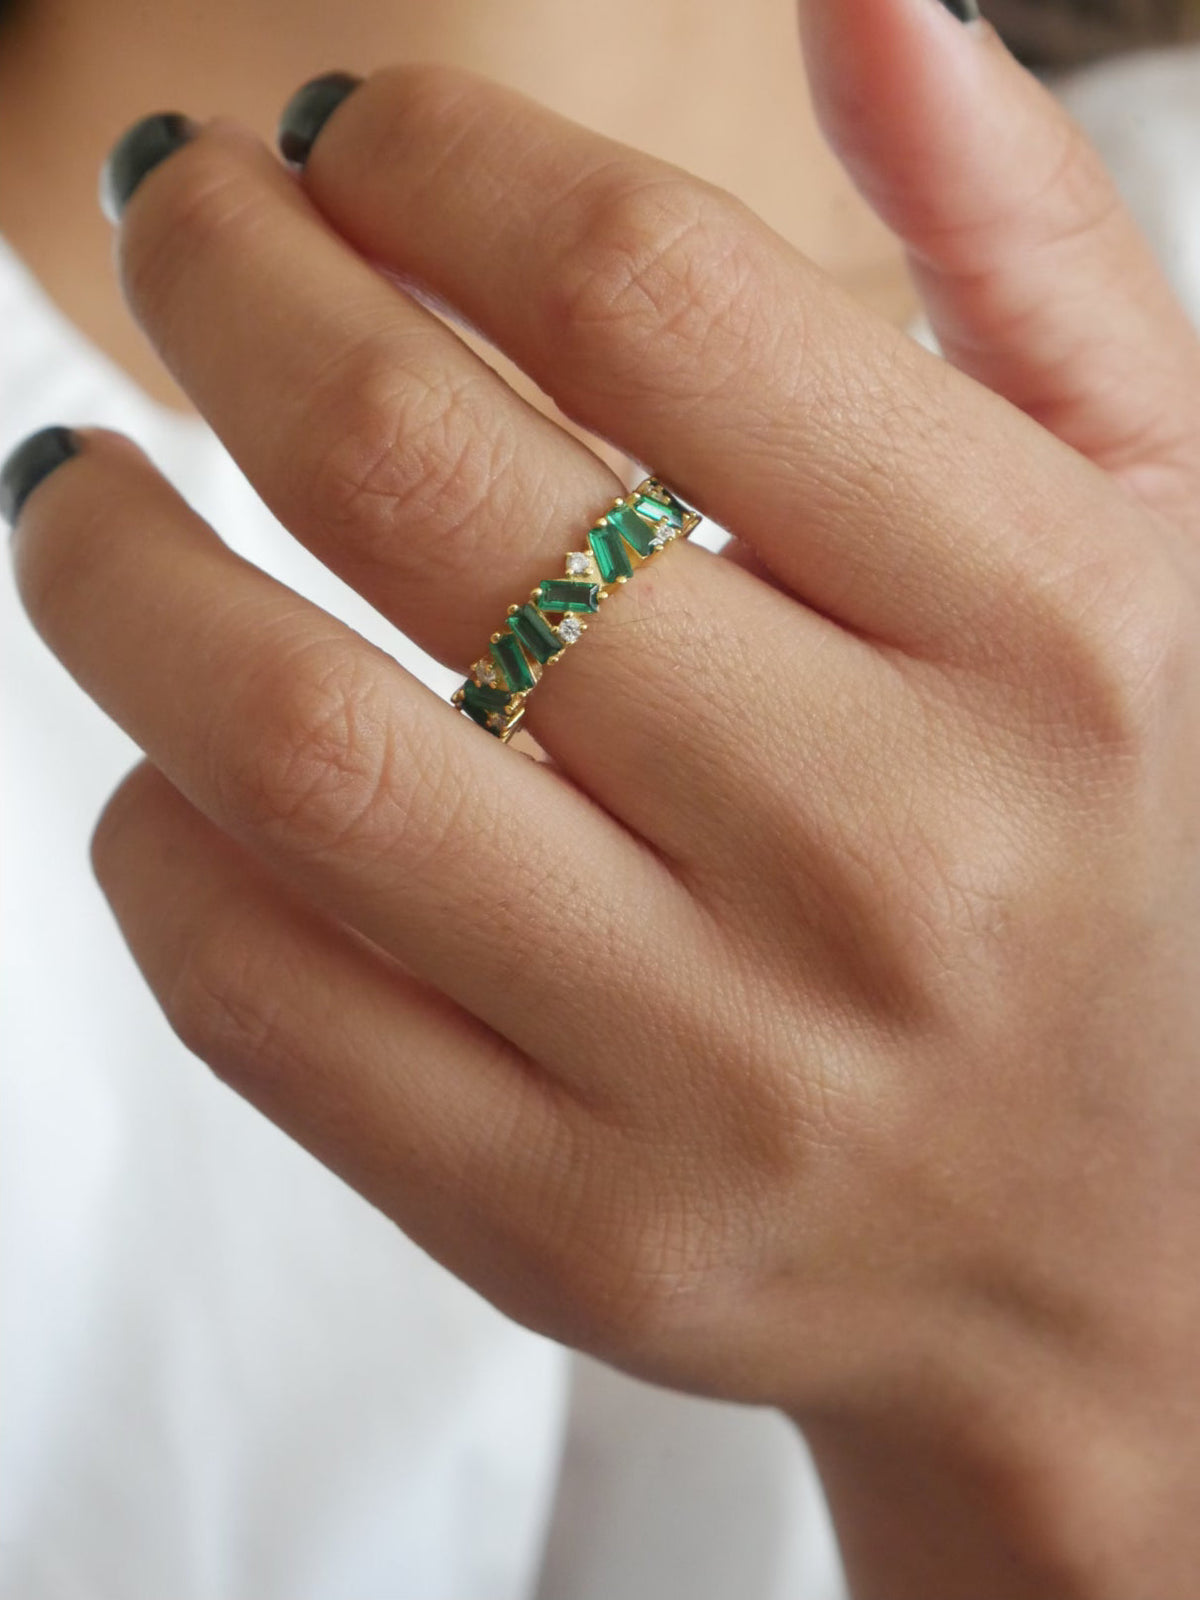 ring, rings, emerald rings, eternity rings, womens rings, green rhinestone rings, wedding bands, cheap wedding bands, emerald wedding bands, statement rings, womens jewelry, cute rings, ring ideas, dainty rings, gold vermeil rings, gold plated rings, trending jewelry, popular rings, nice jewelry, fine jewelry, size 6 rings, size 7 rings, sterling silver rings,size 9 rings , kesley jewelry, cool rings, birthday gifts, anniversary gifts, valentines gifts 